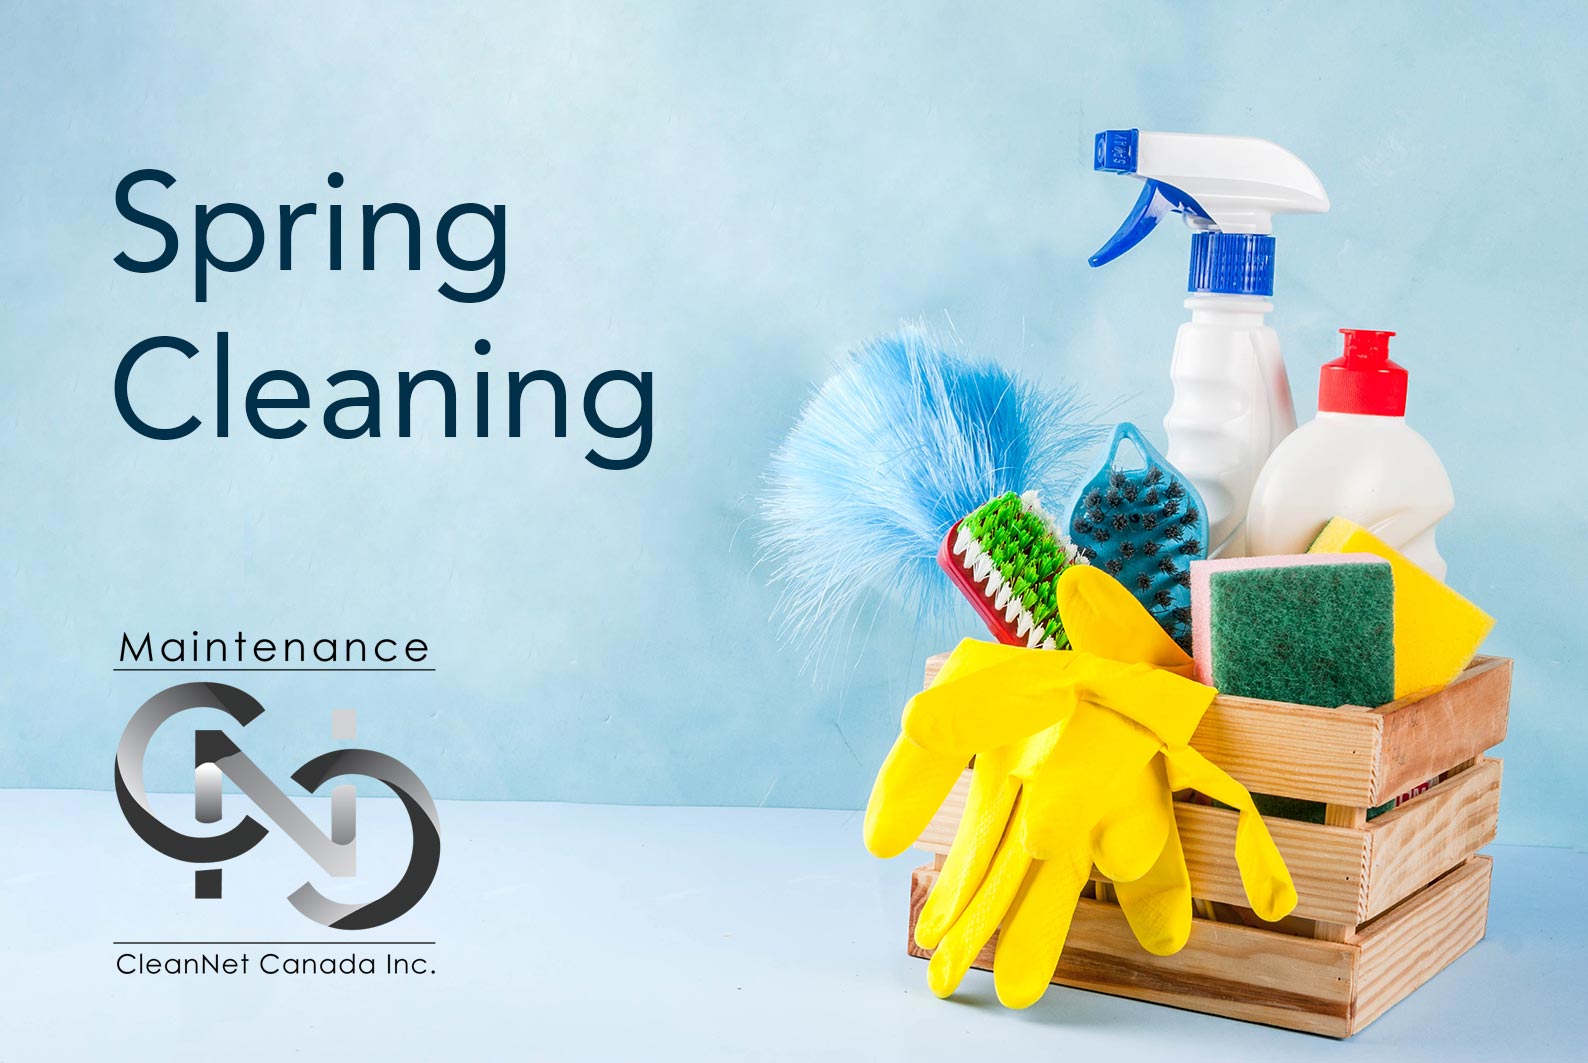 4 Areas to Focus On in Your Spring Cleaning